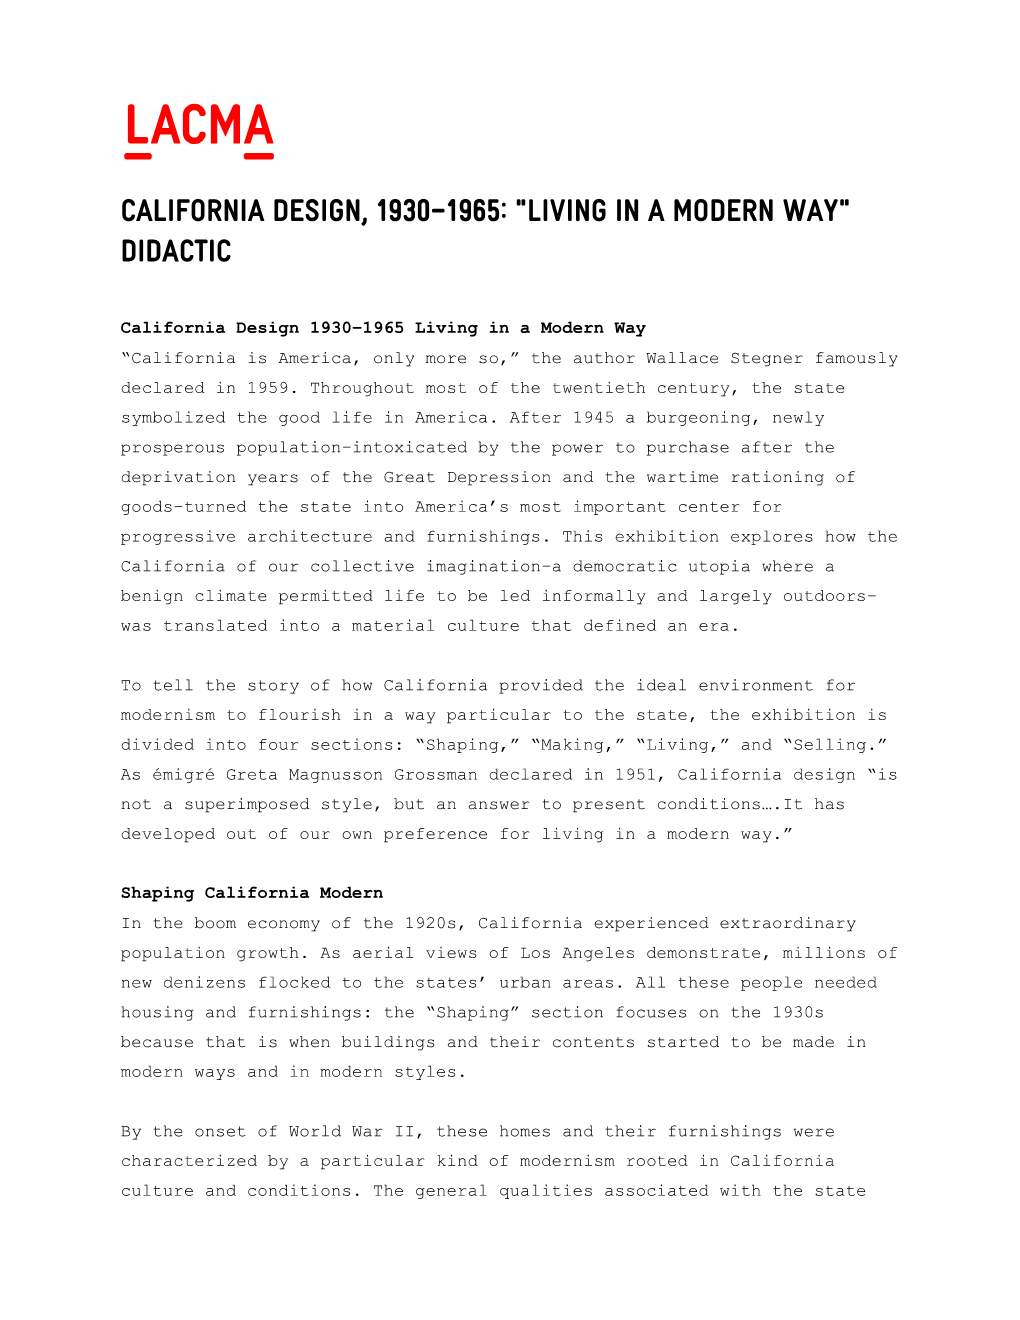 California Design, 1930–1965: “Living in a Modern Way” Didactic